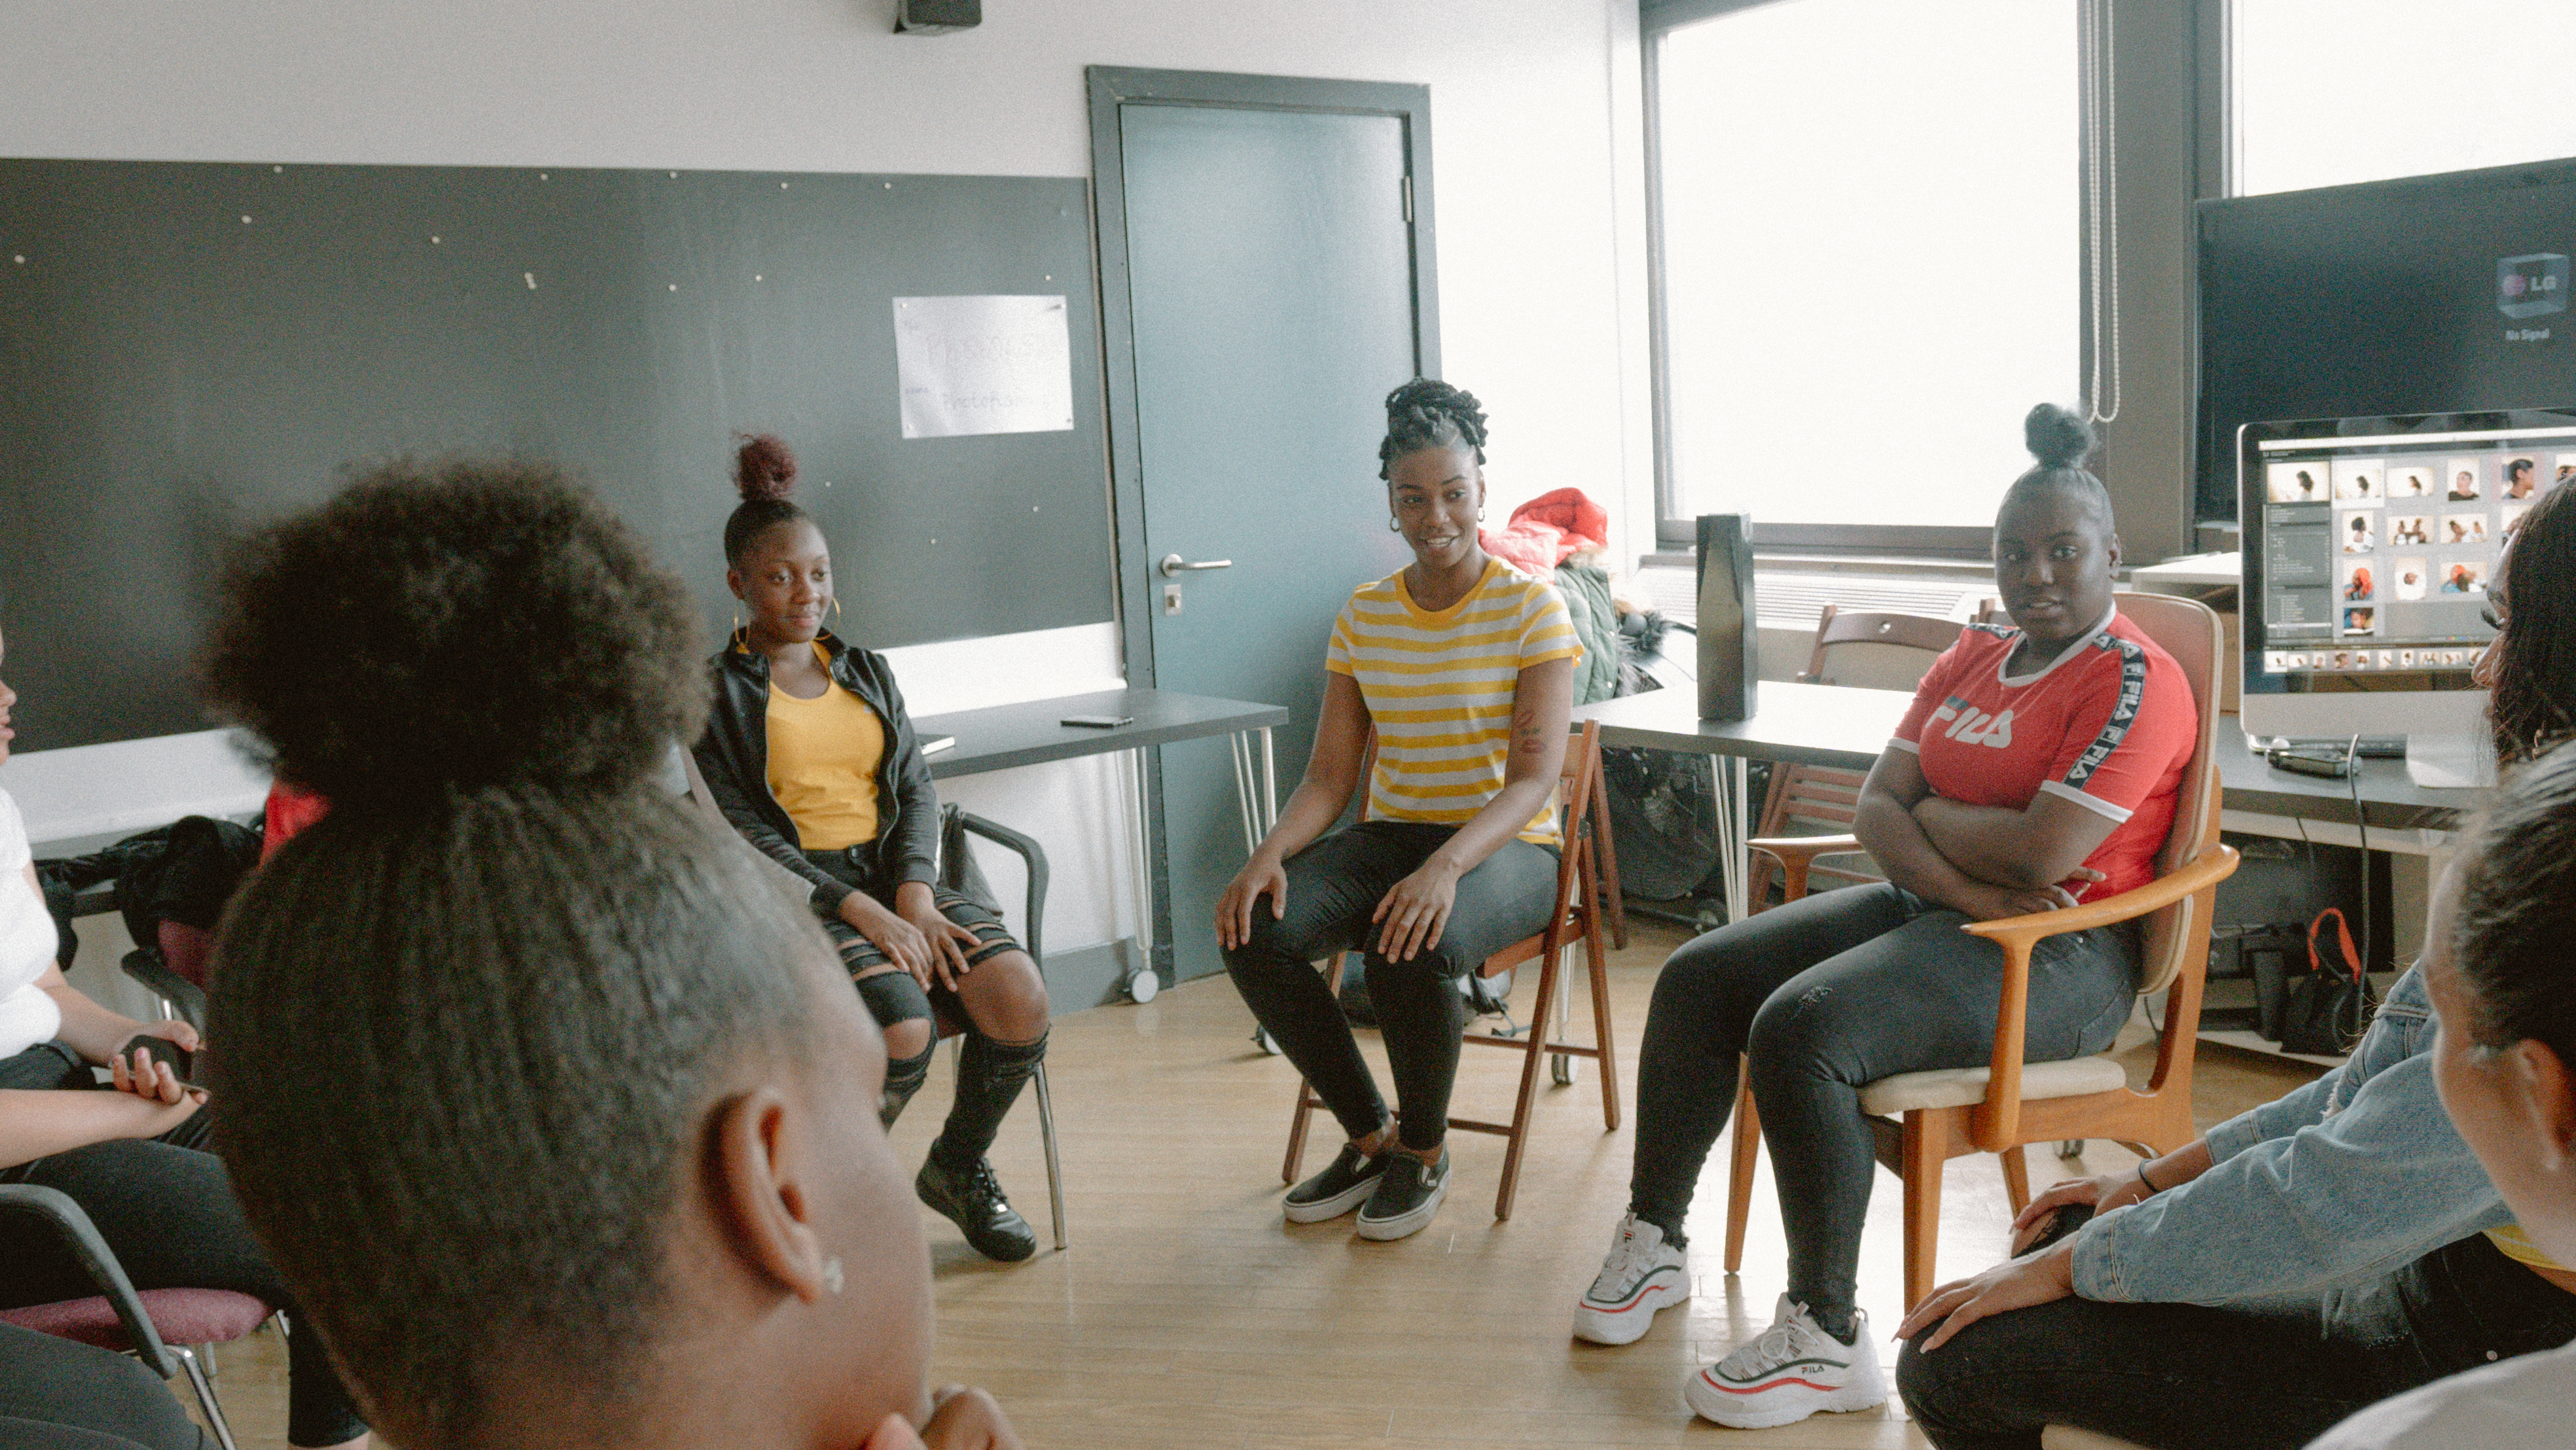 Milk & Honey: A Platform That Provides Young Women With A Safe Place Like No Other